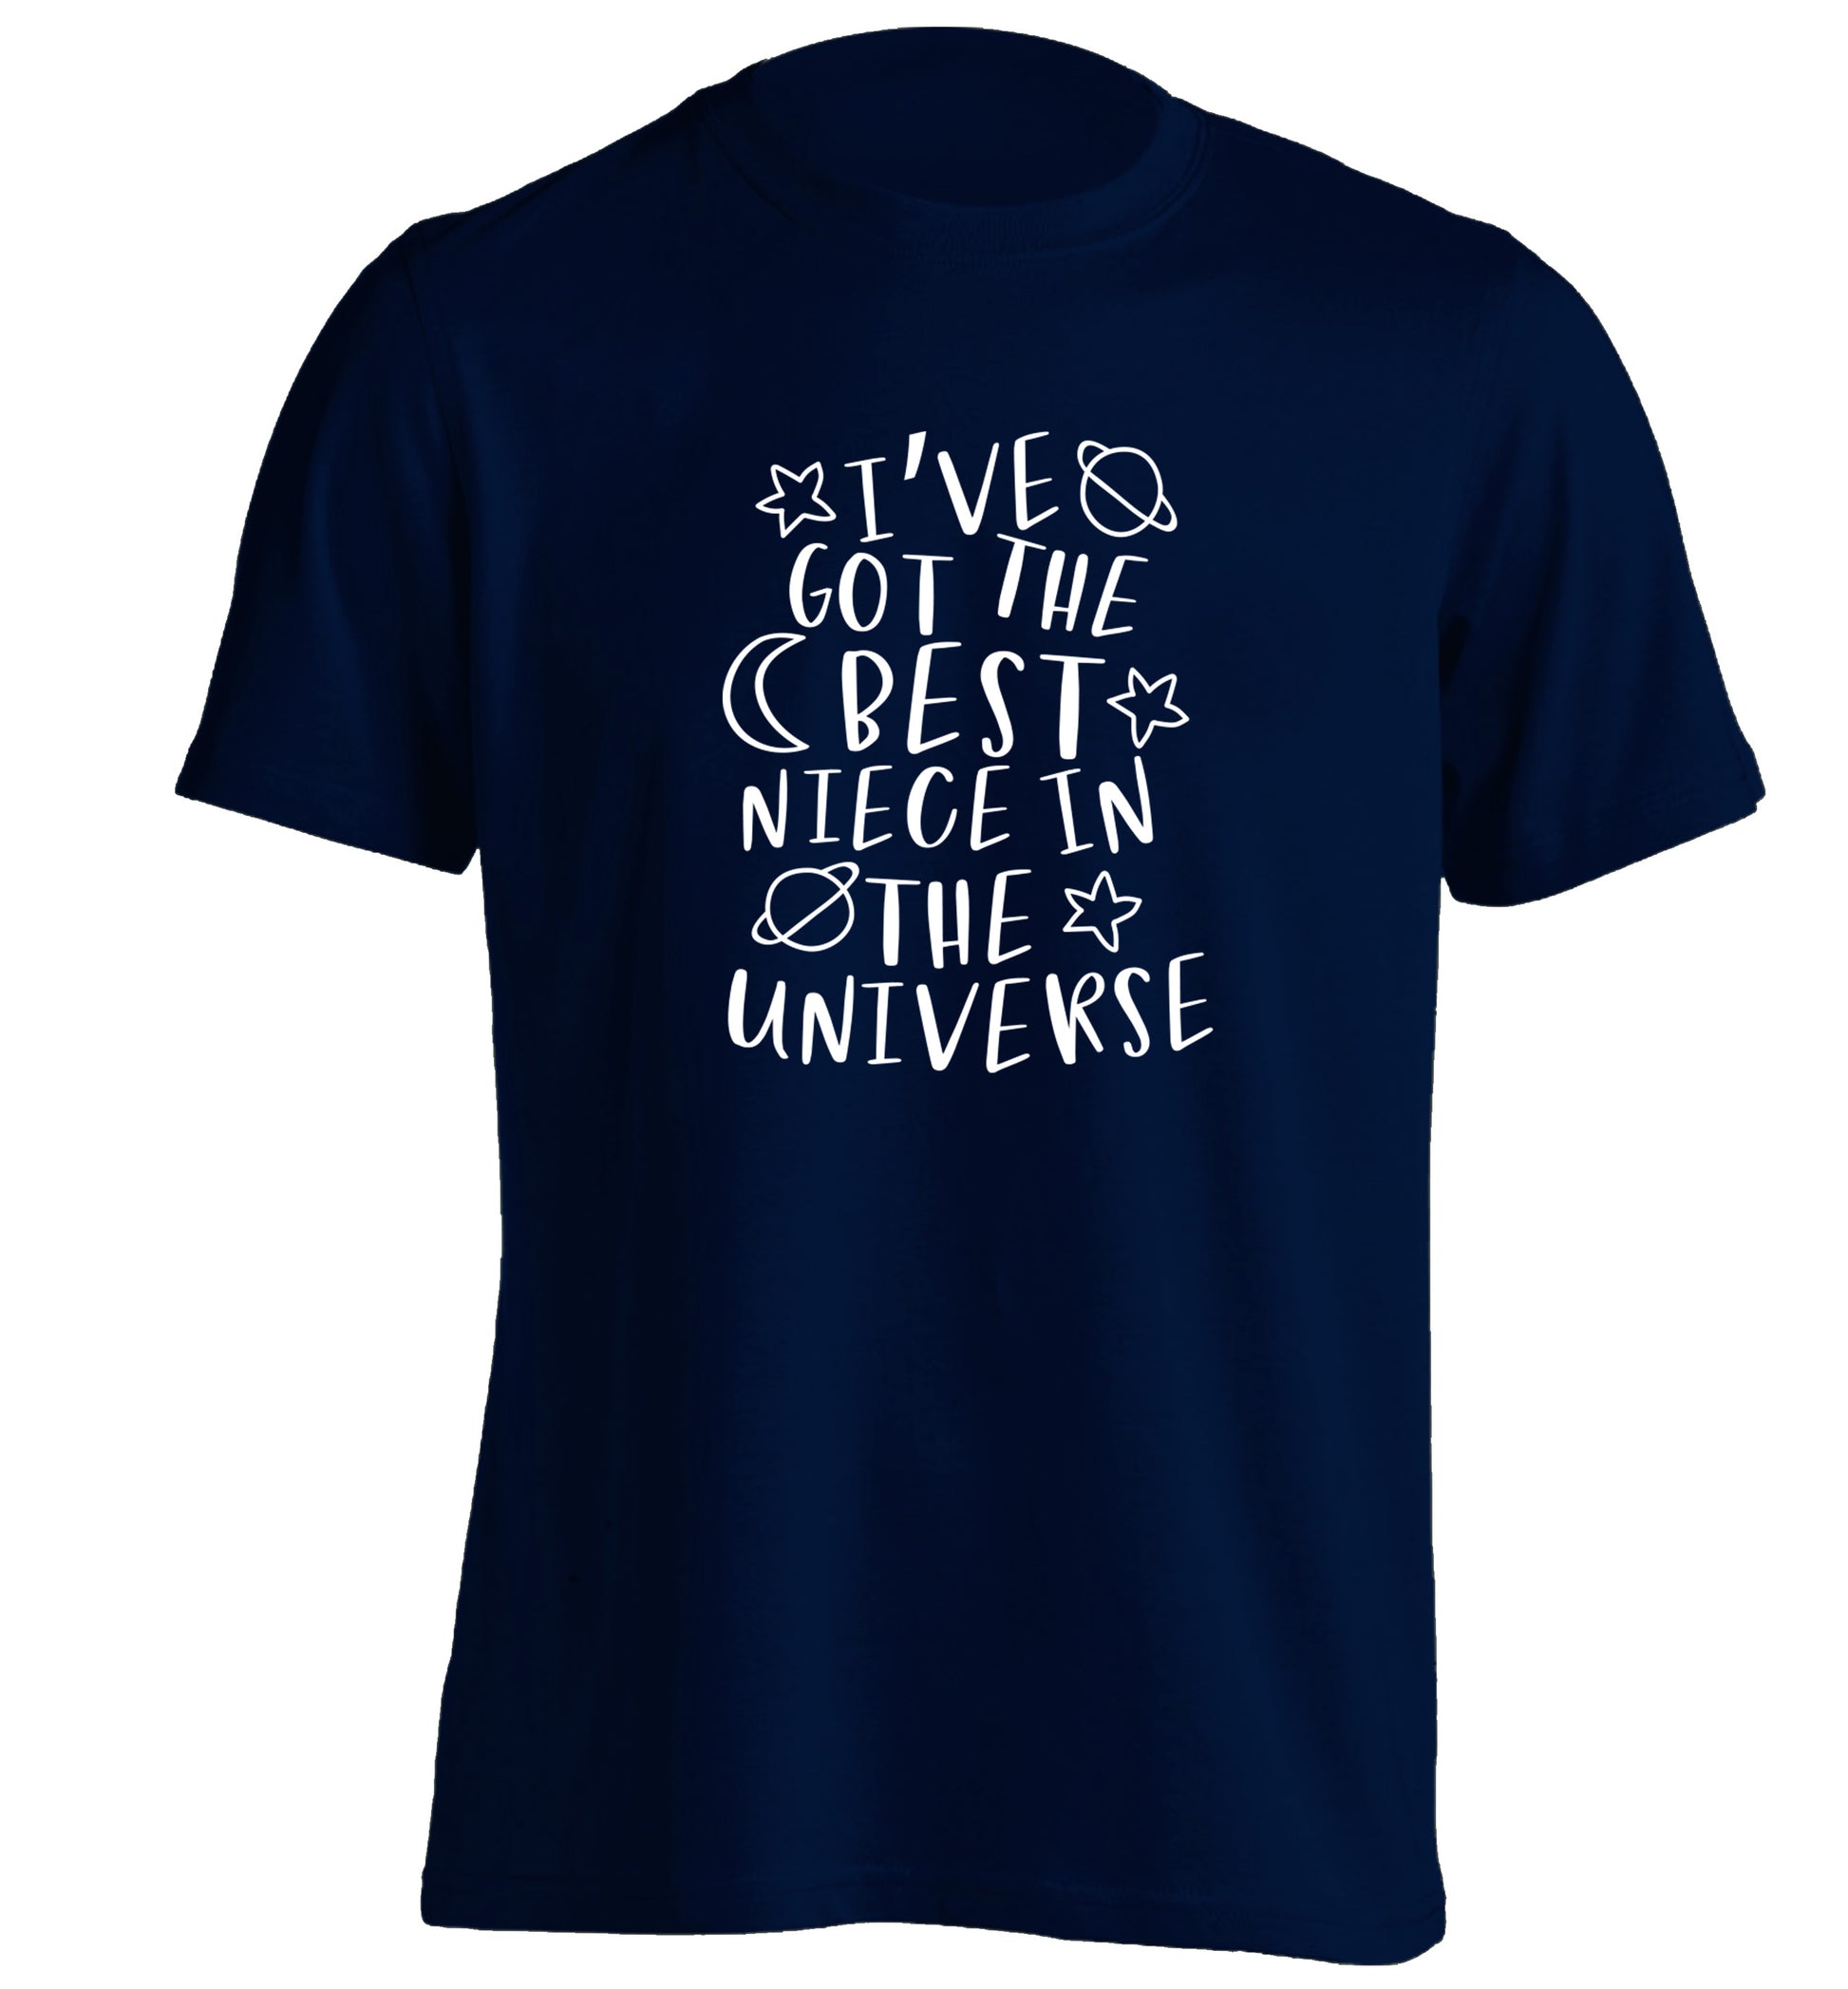 I've got the best niece in the universe adults unisex navy Tshirt 2XL